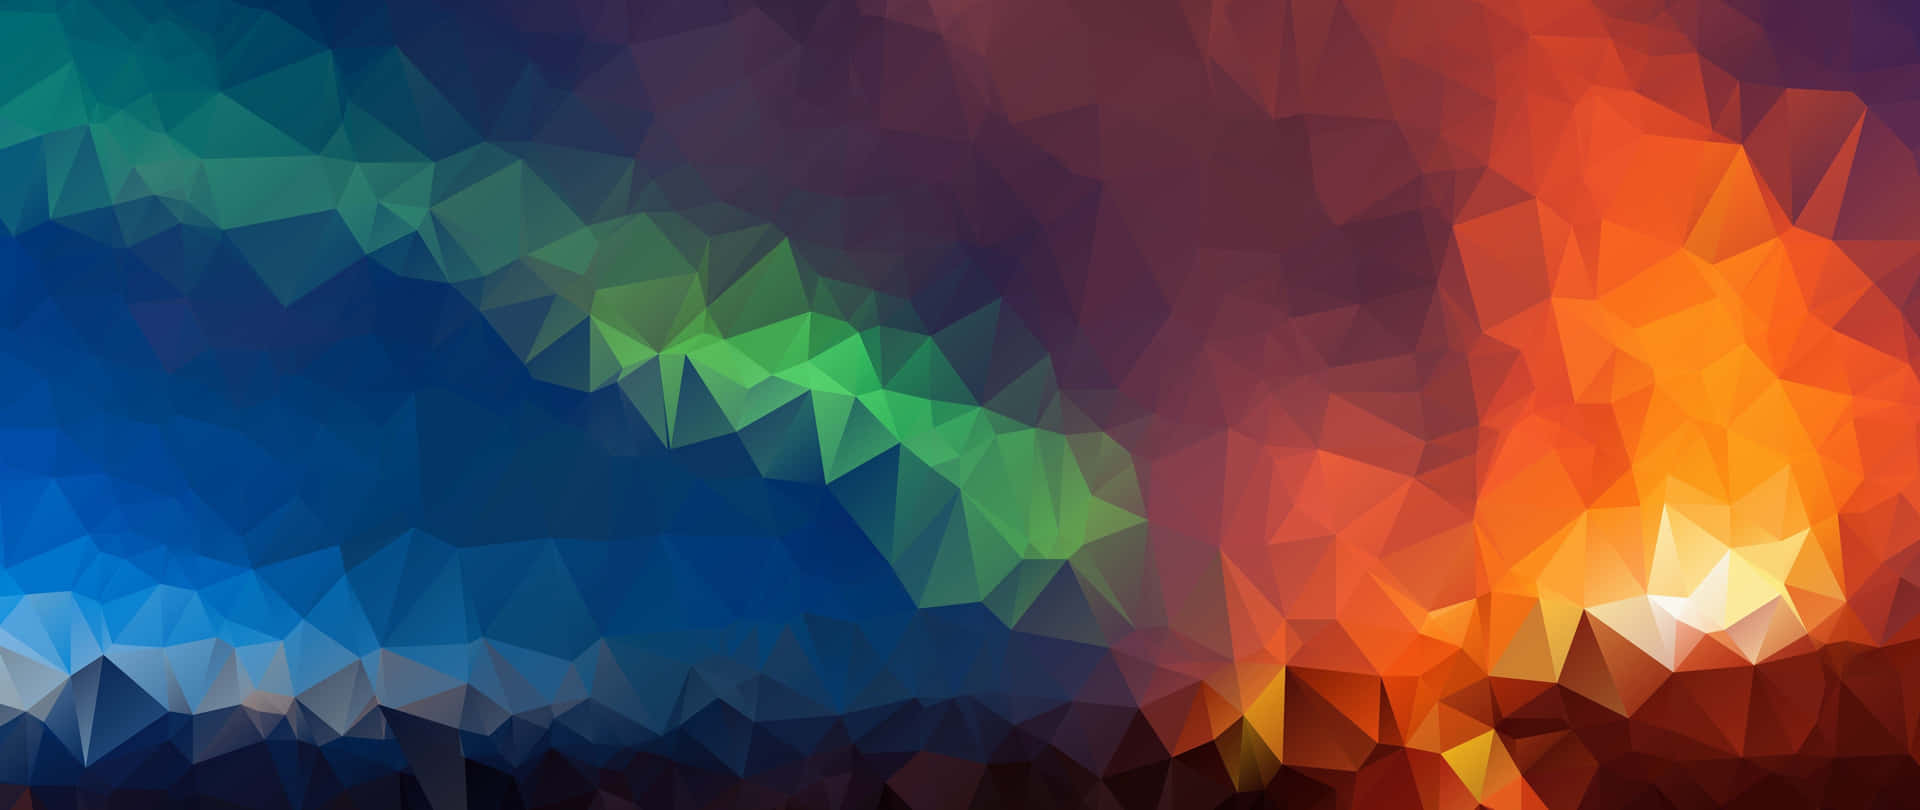 A Colorful Abstract Background With A Colorful Aurora Wallpaper